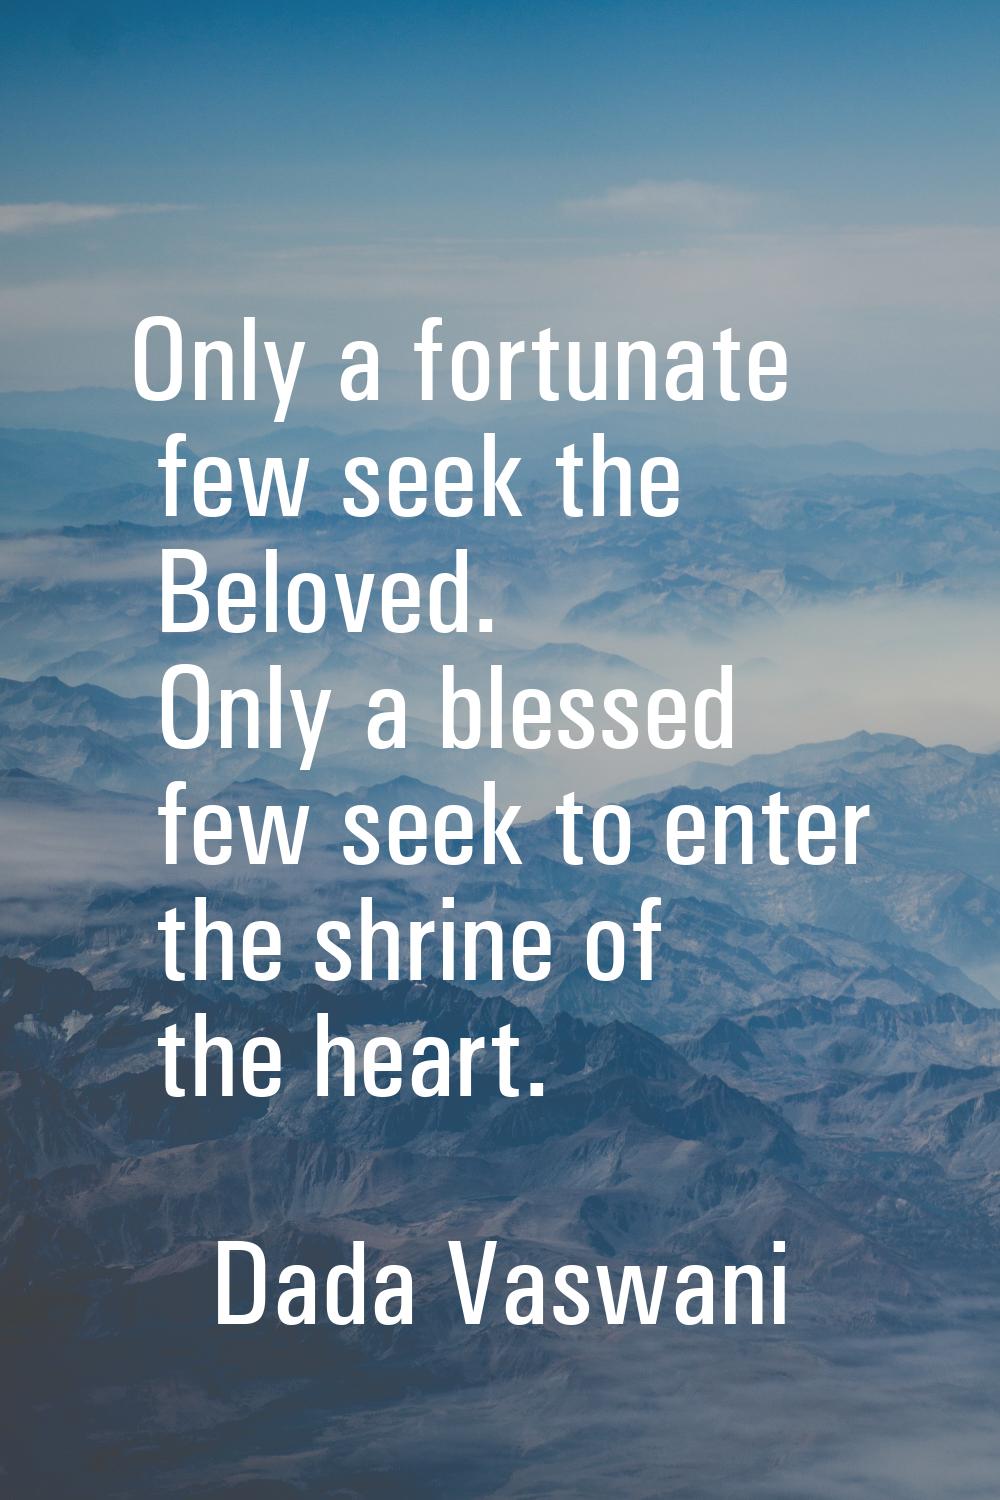 Only a fortunate few seek the Beloved. Only a blessed few seek to enter the shrine of the heart.